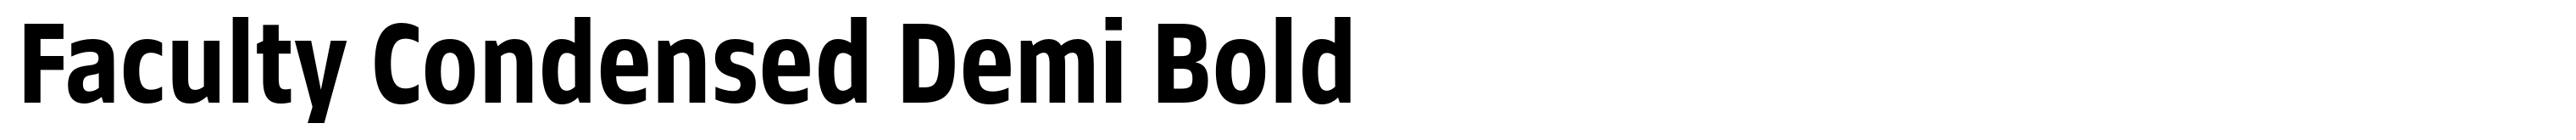 Faculty Condensed Demi Bold